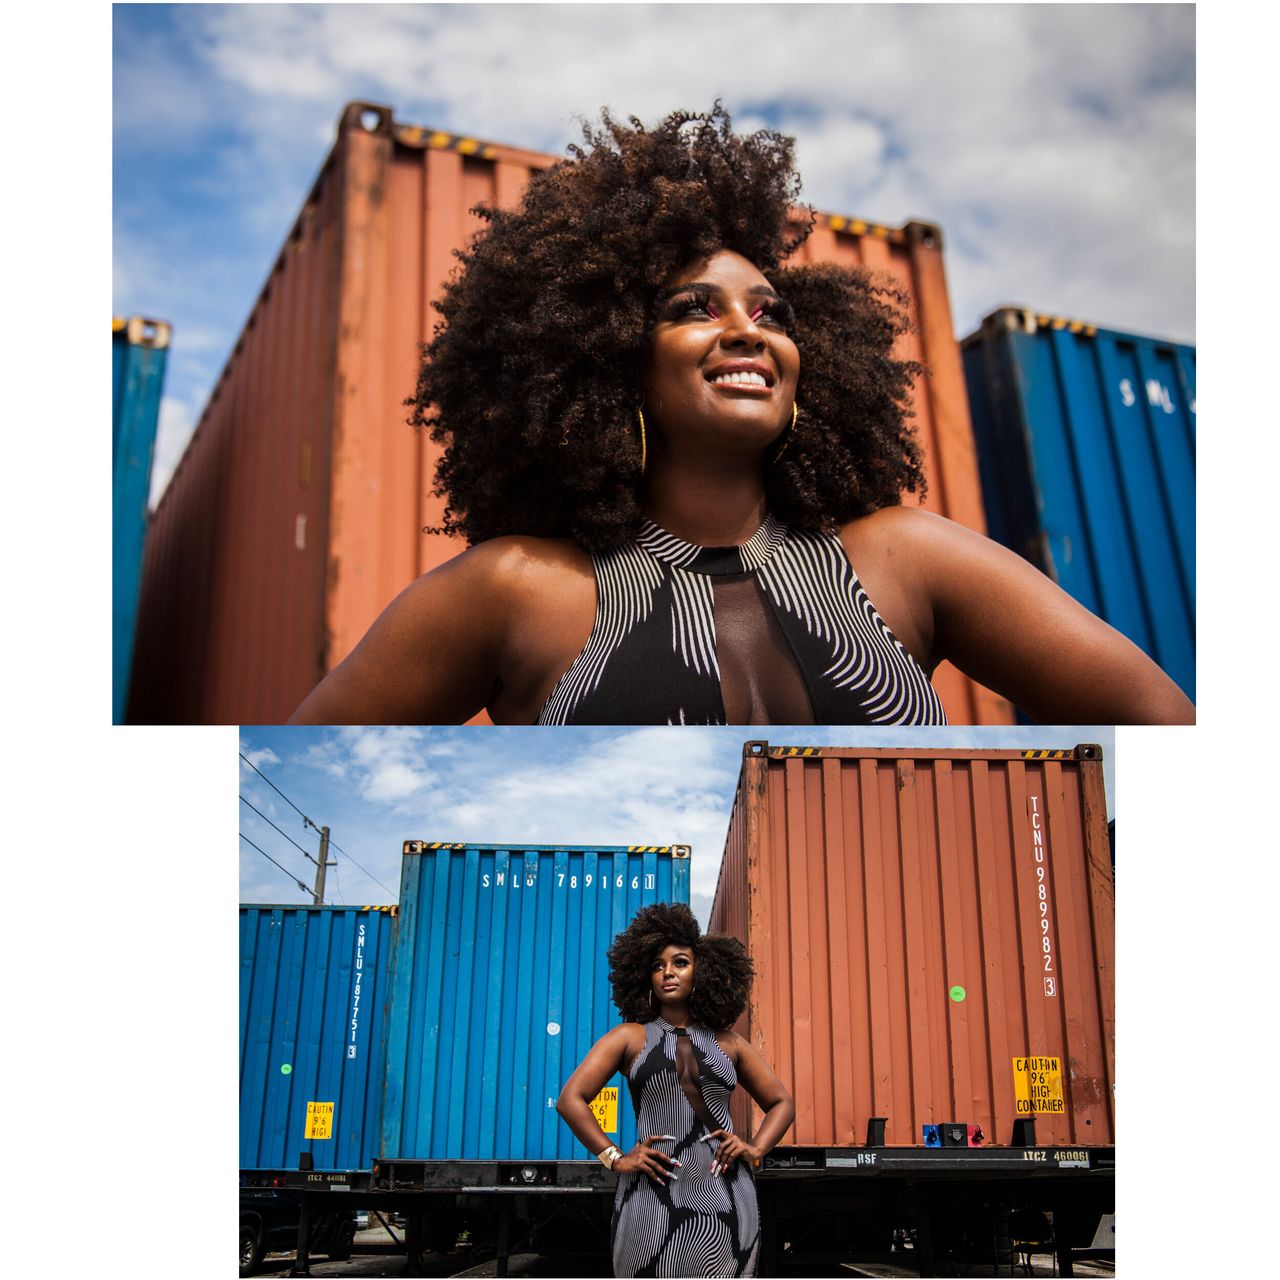 Amara La Negra, a Dominican-American hip-hop artist stands and poses in Miami, Florida on Aug. 29, 2019. 